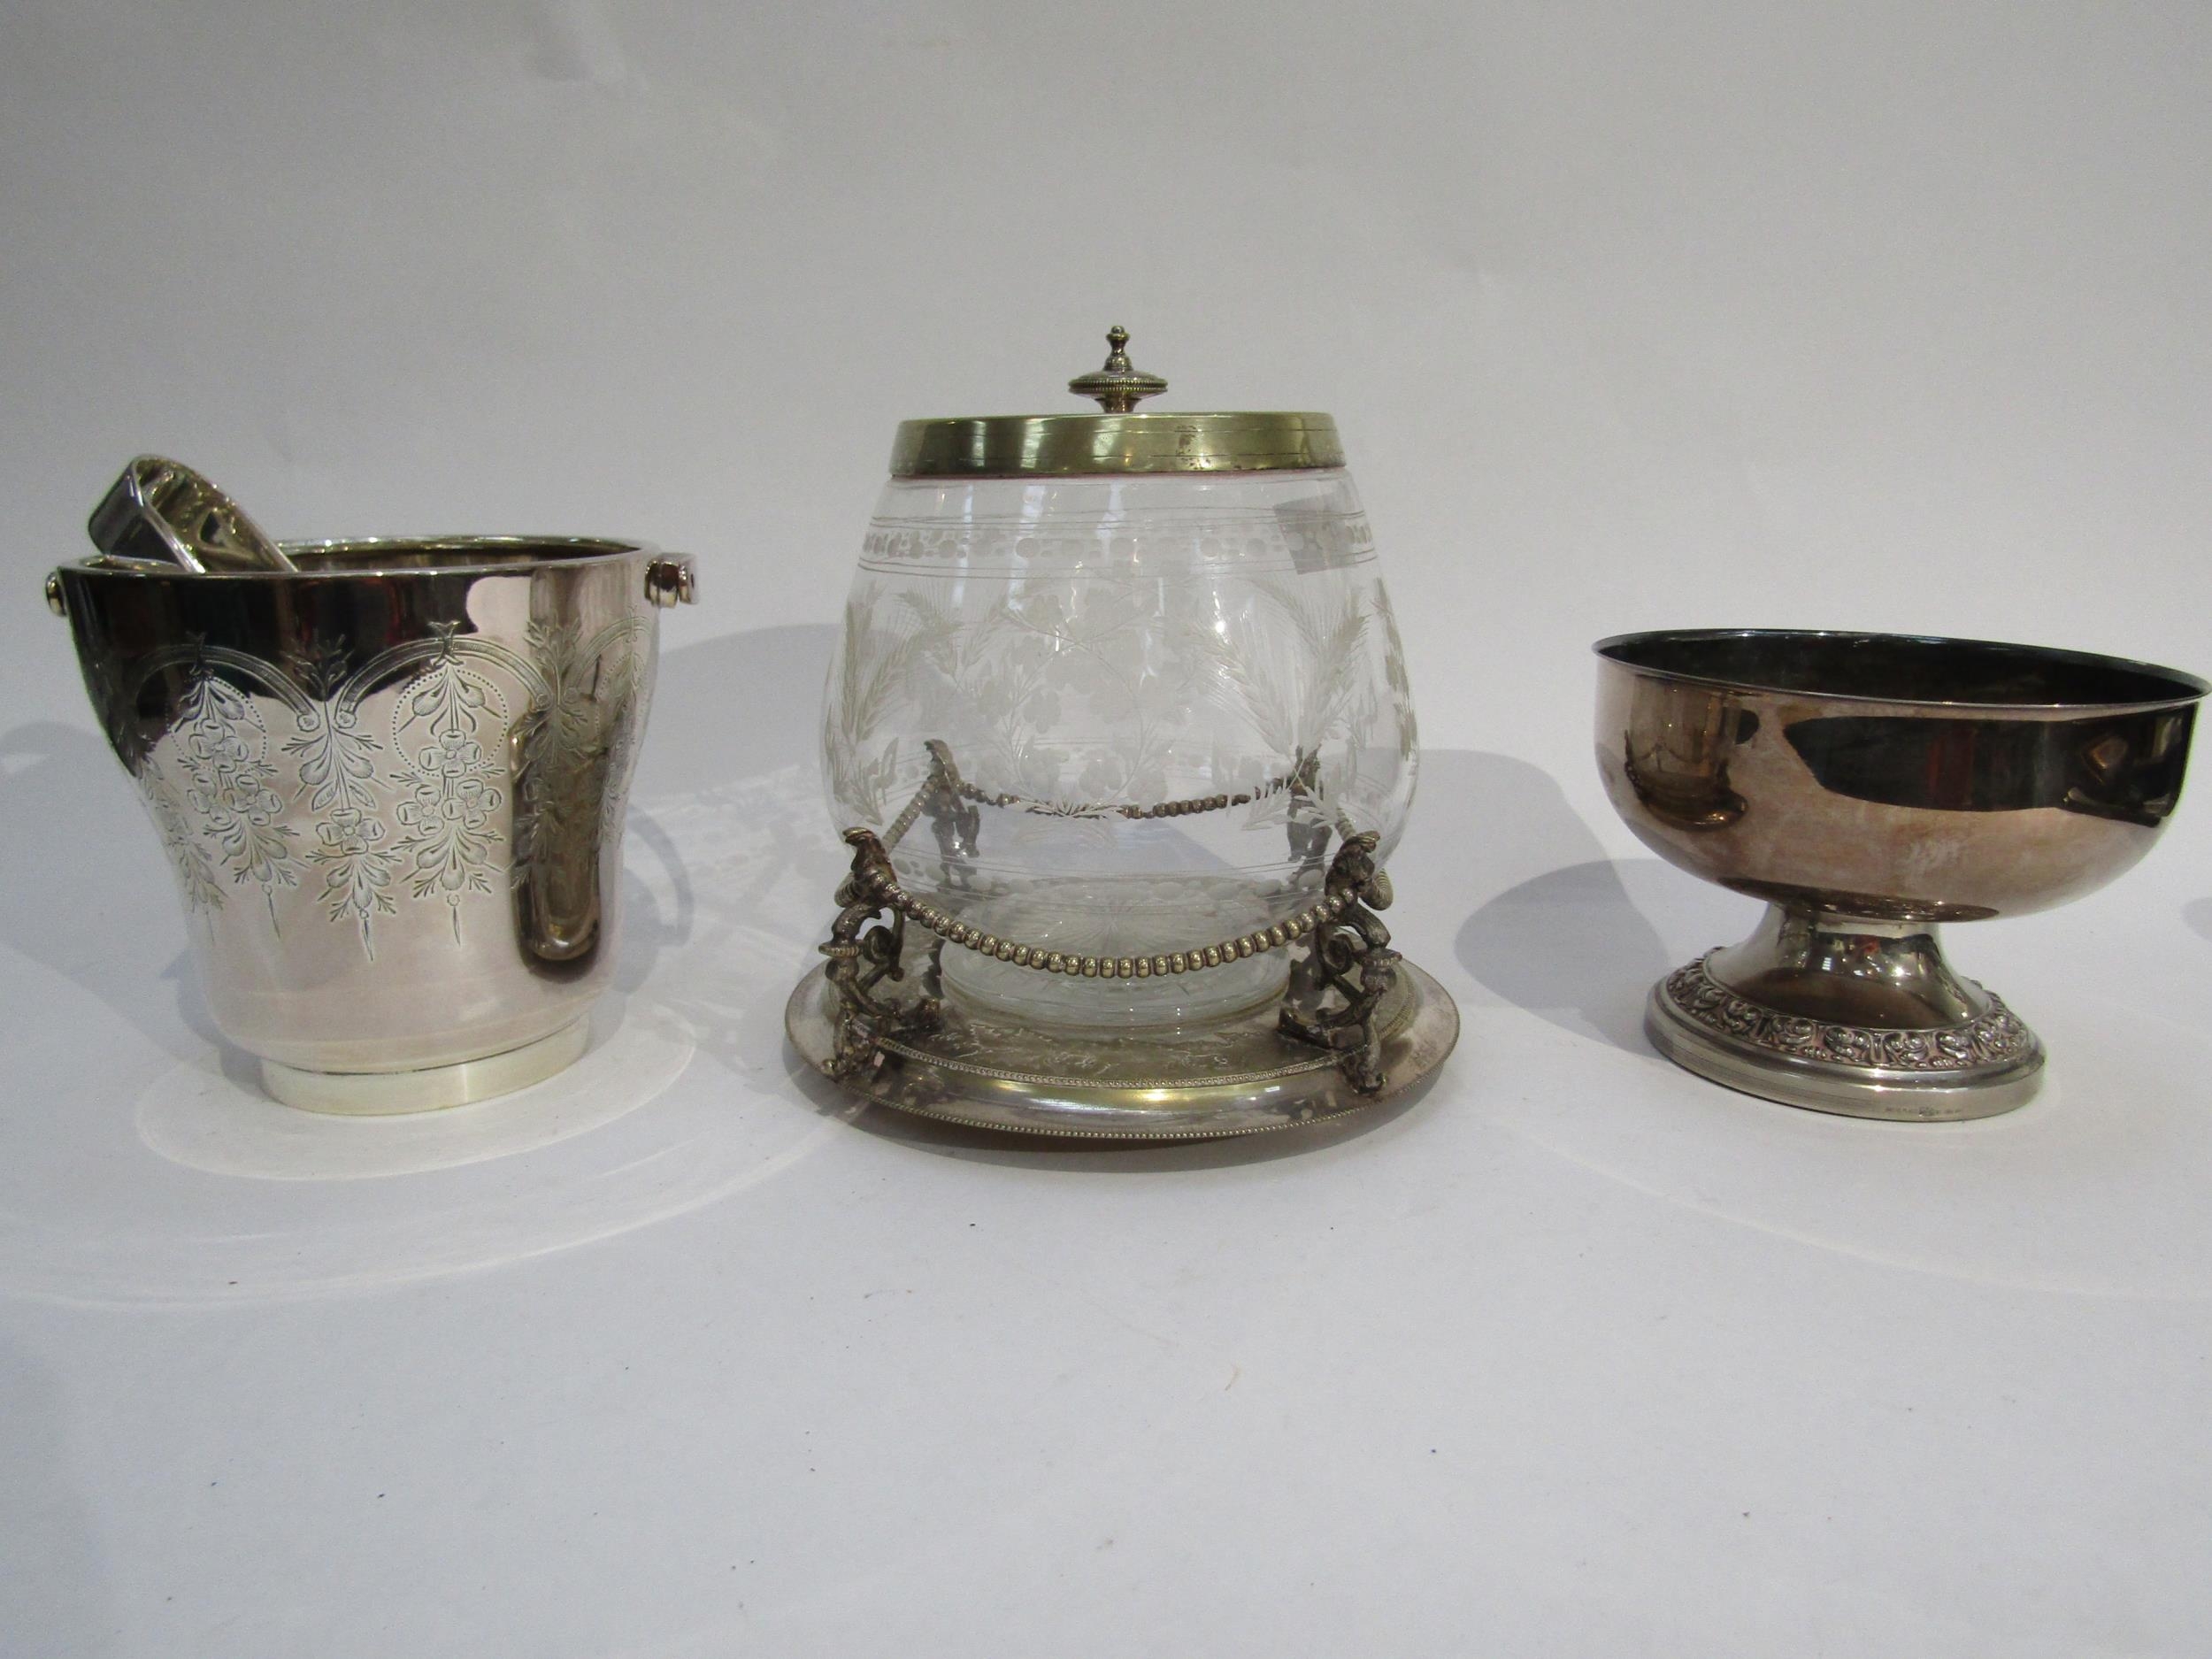 Silverplated ice bucket, biscuit barrel and pedestal bowl (3)